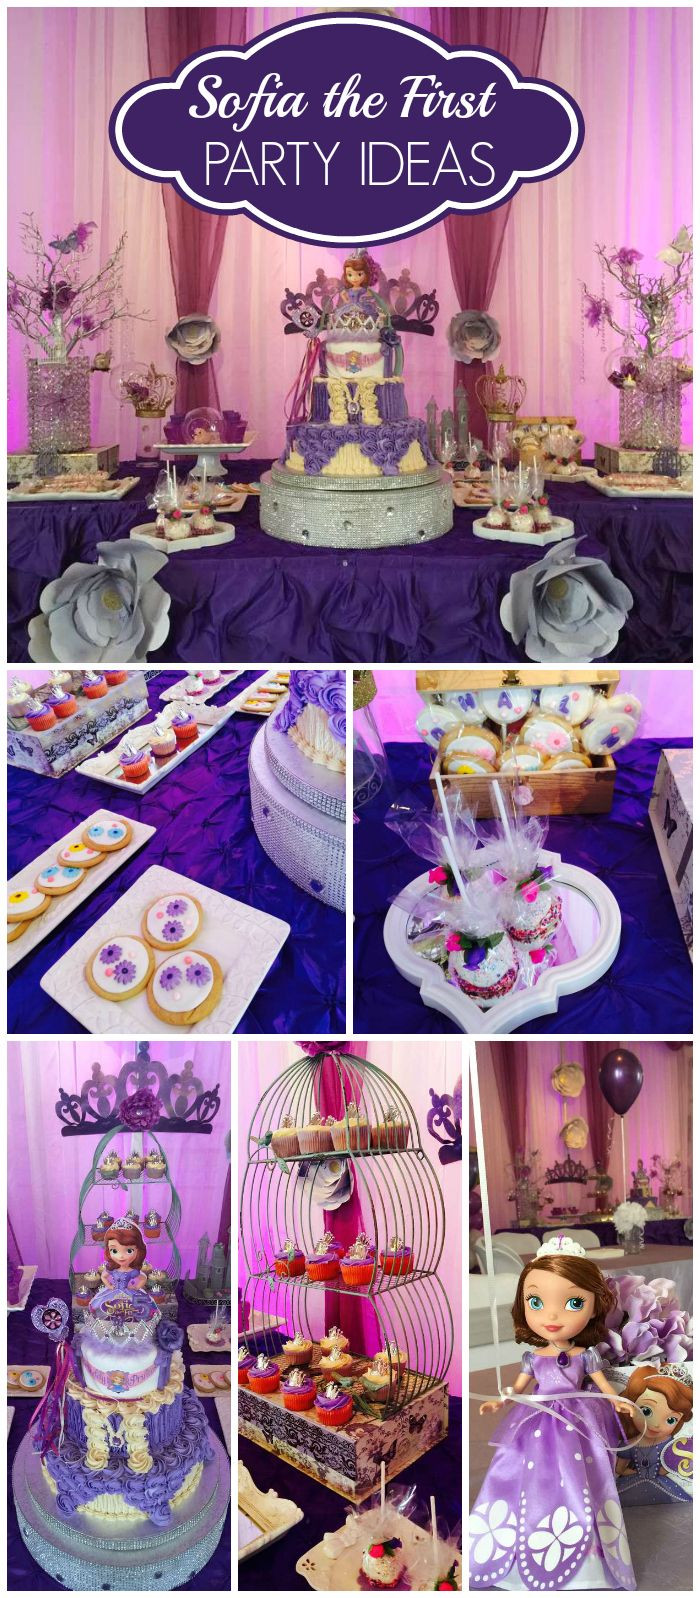 Sofia The First Birthday Party Decorations
 1000 images about Sofia the First Party Ideas on